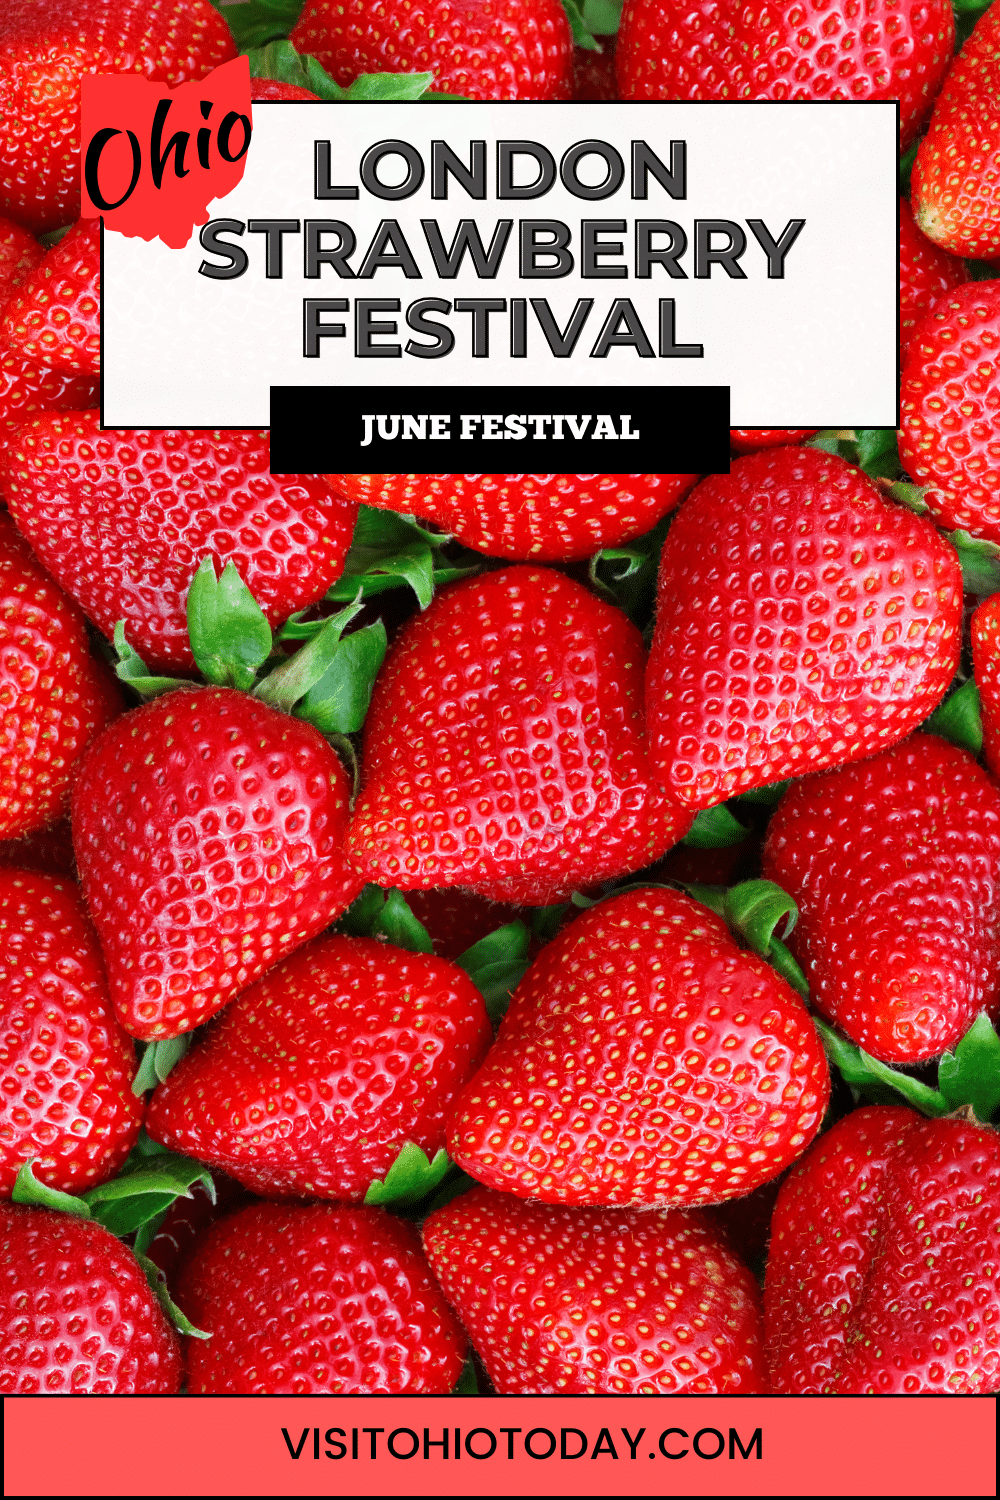 London Strawberry Festival is a three-day event that takes place annually on the Thursday, Friday, and Saturday following Father’s Day in downtown historic London.